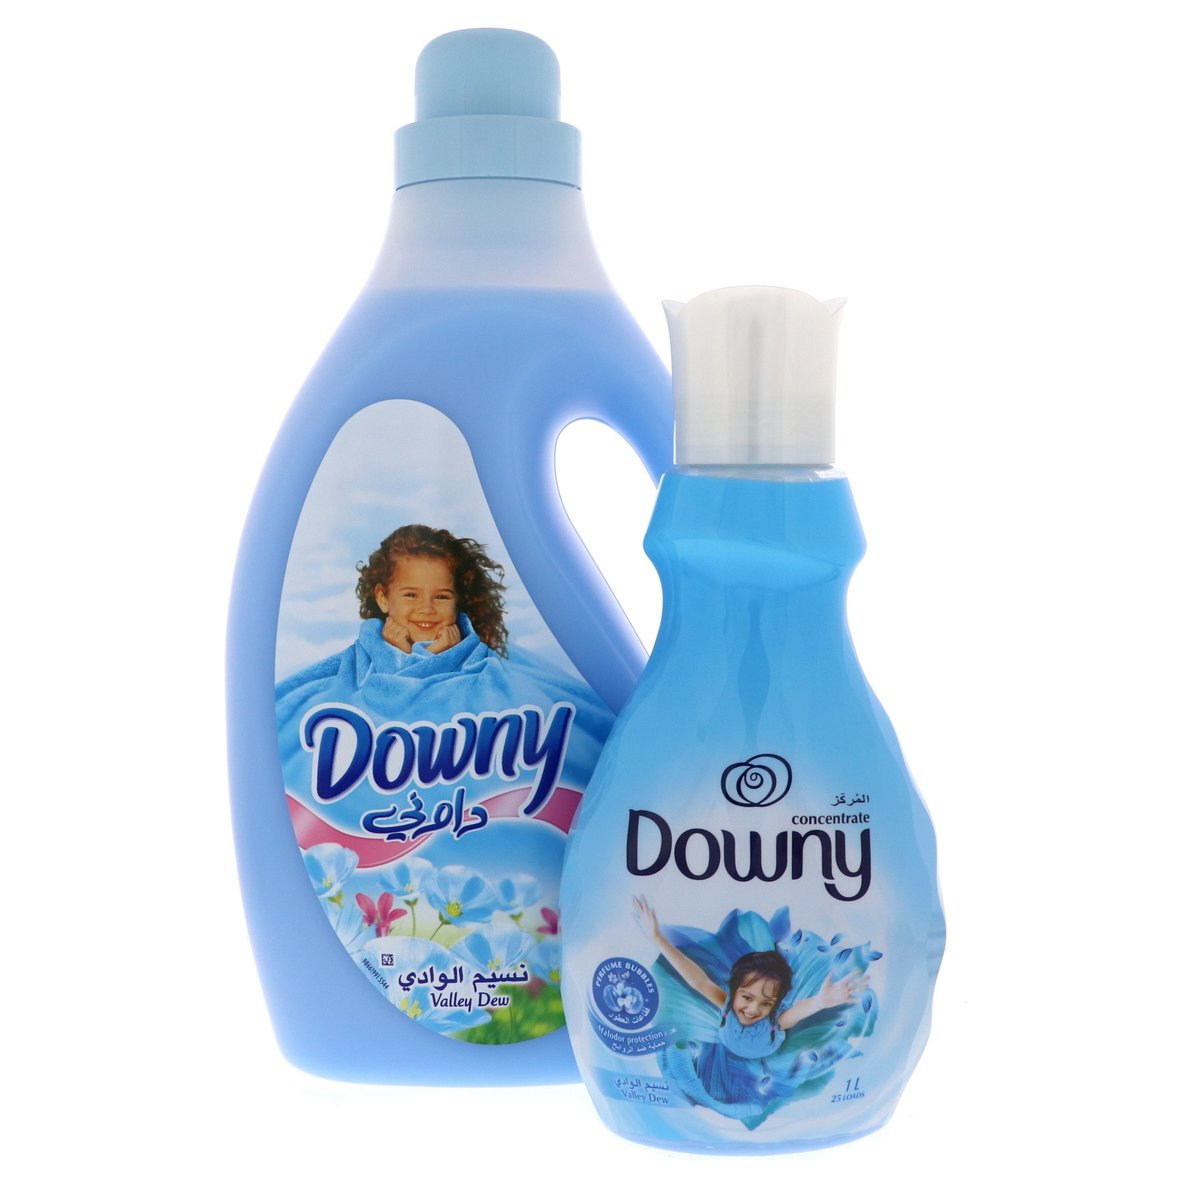 Downy Valley Dew Fabric Softener 3Litre + Concentrate Vally Dew 1Litre